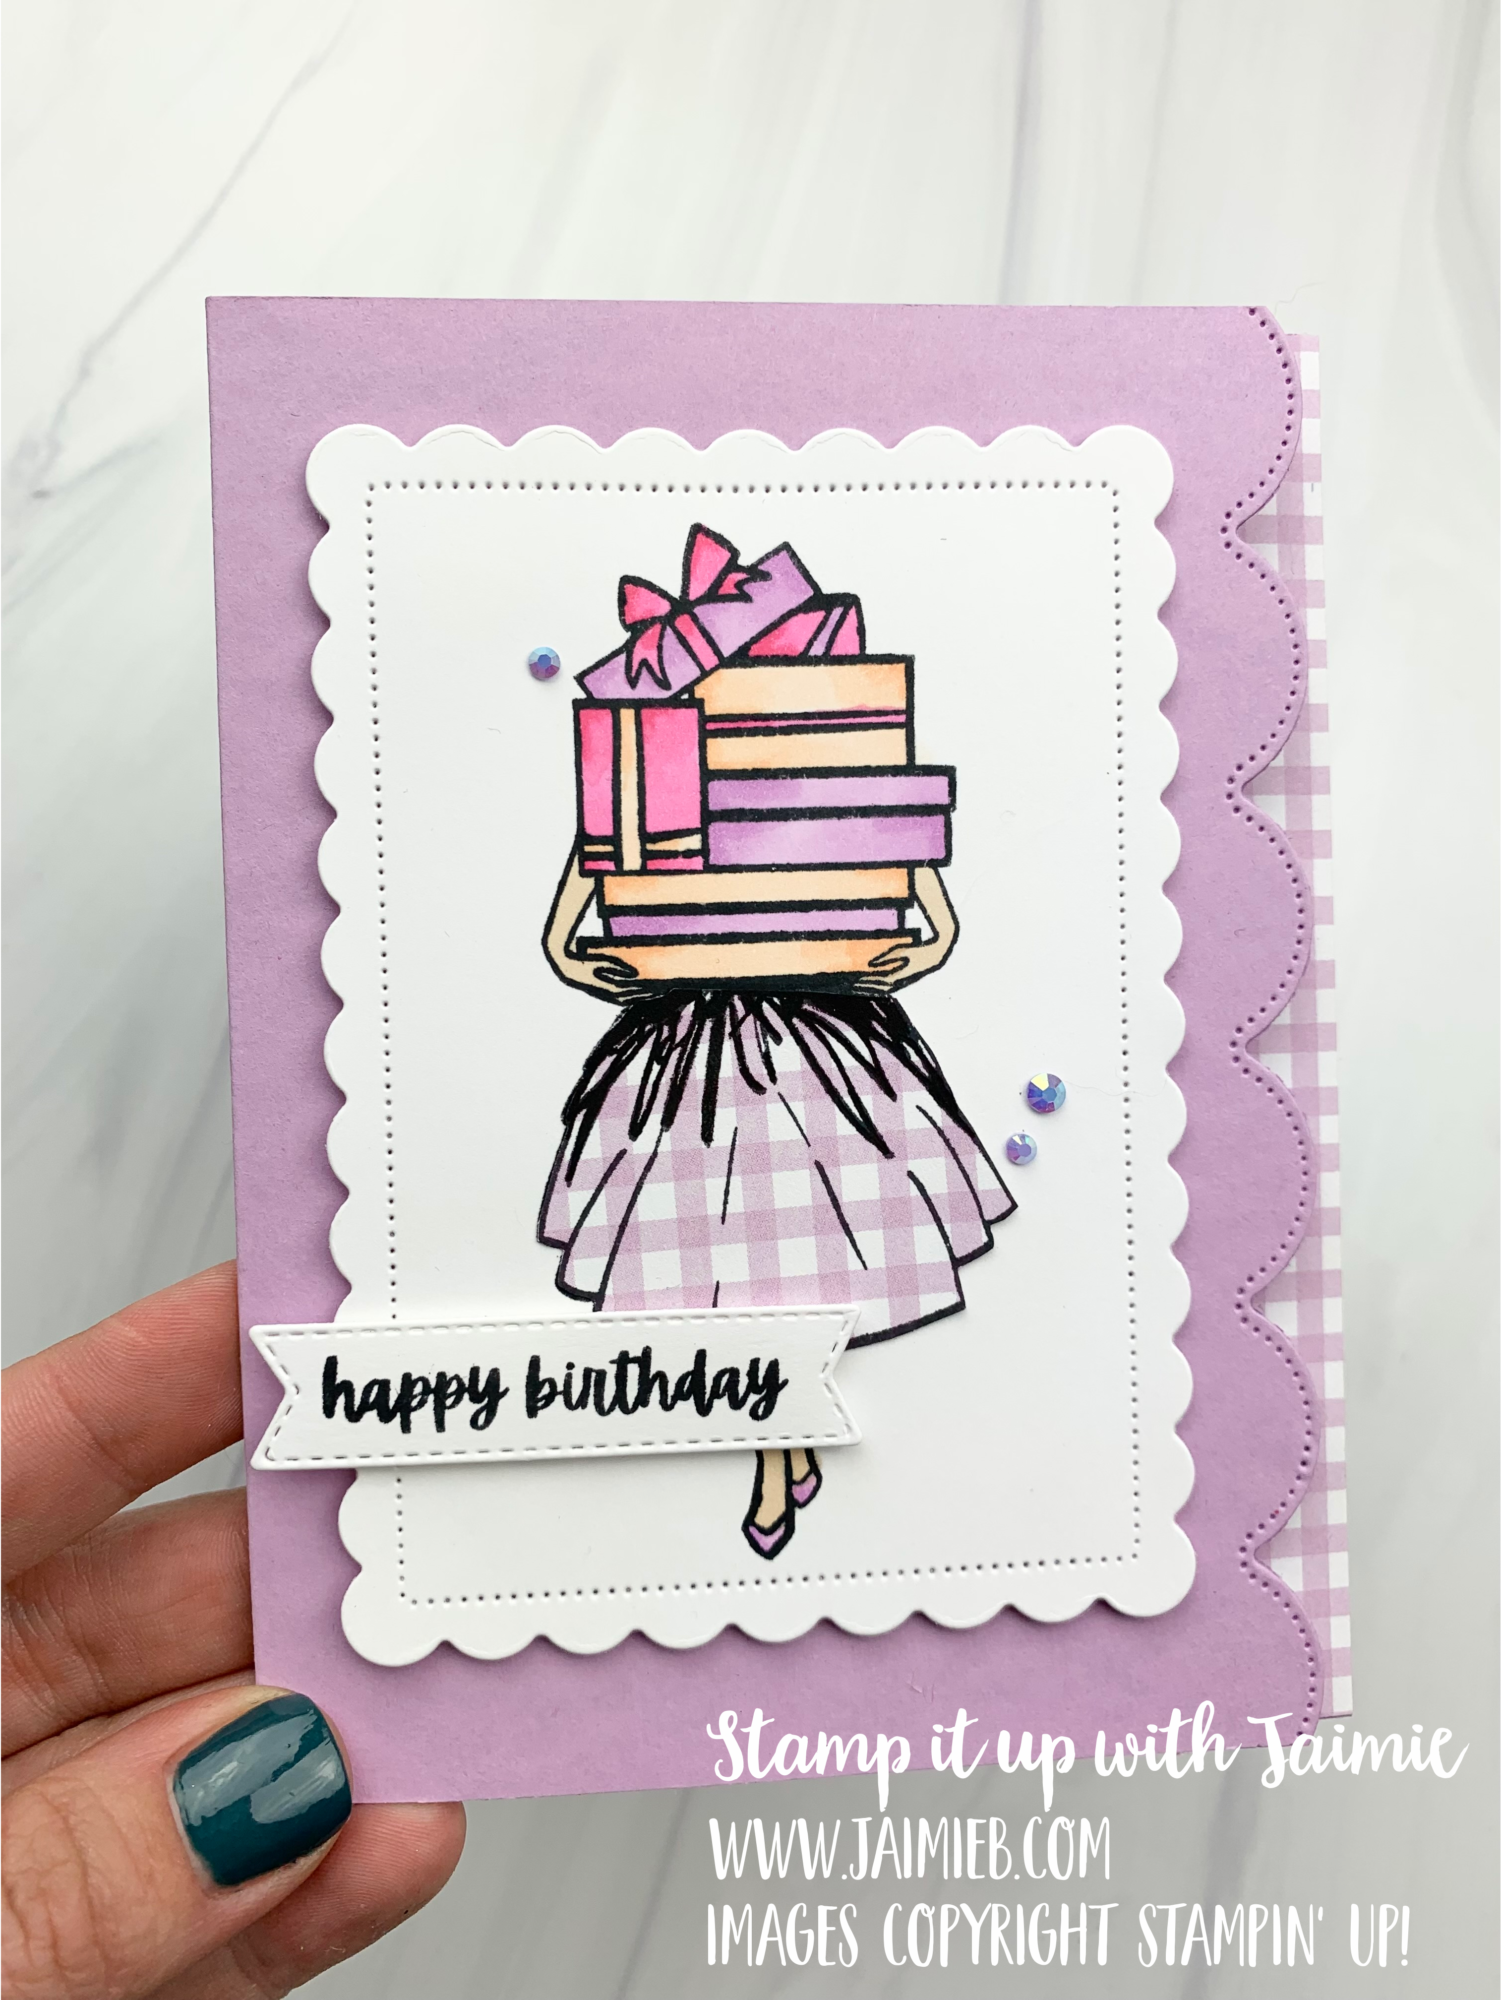 Stampin’ Up! Delivering Cheer Birthday Card